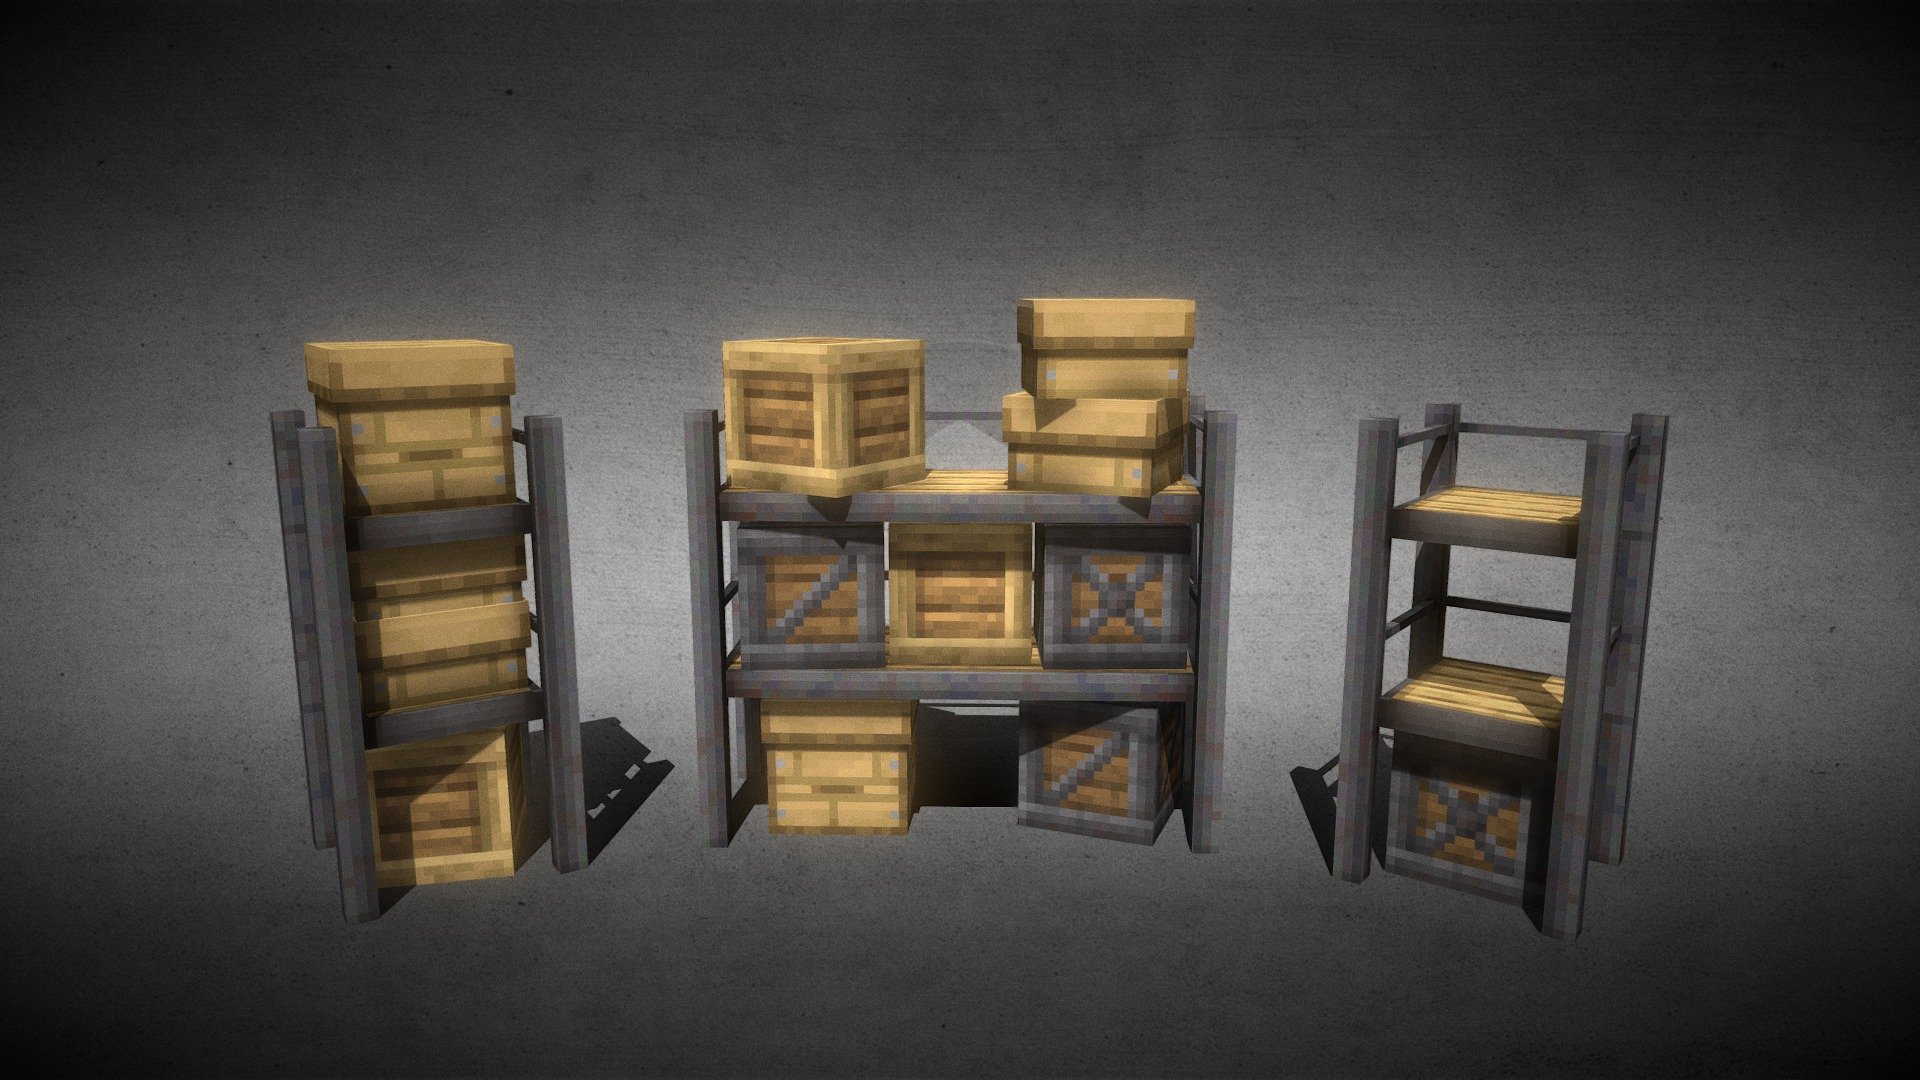 Made for filler assets in a Minecraft Bedrock Add On.

-3x3 Shelving unit

-1x1 Shelving Unit

-16x16 pixel resolution with a box UV format

-5 variants of crates/cardboard boxes - Shelving Units [Low-Poly - Voxel] - 3D model by Radium (@Radium_Studio) 3d model